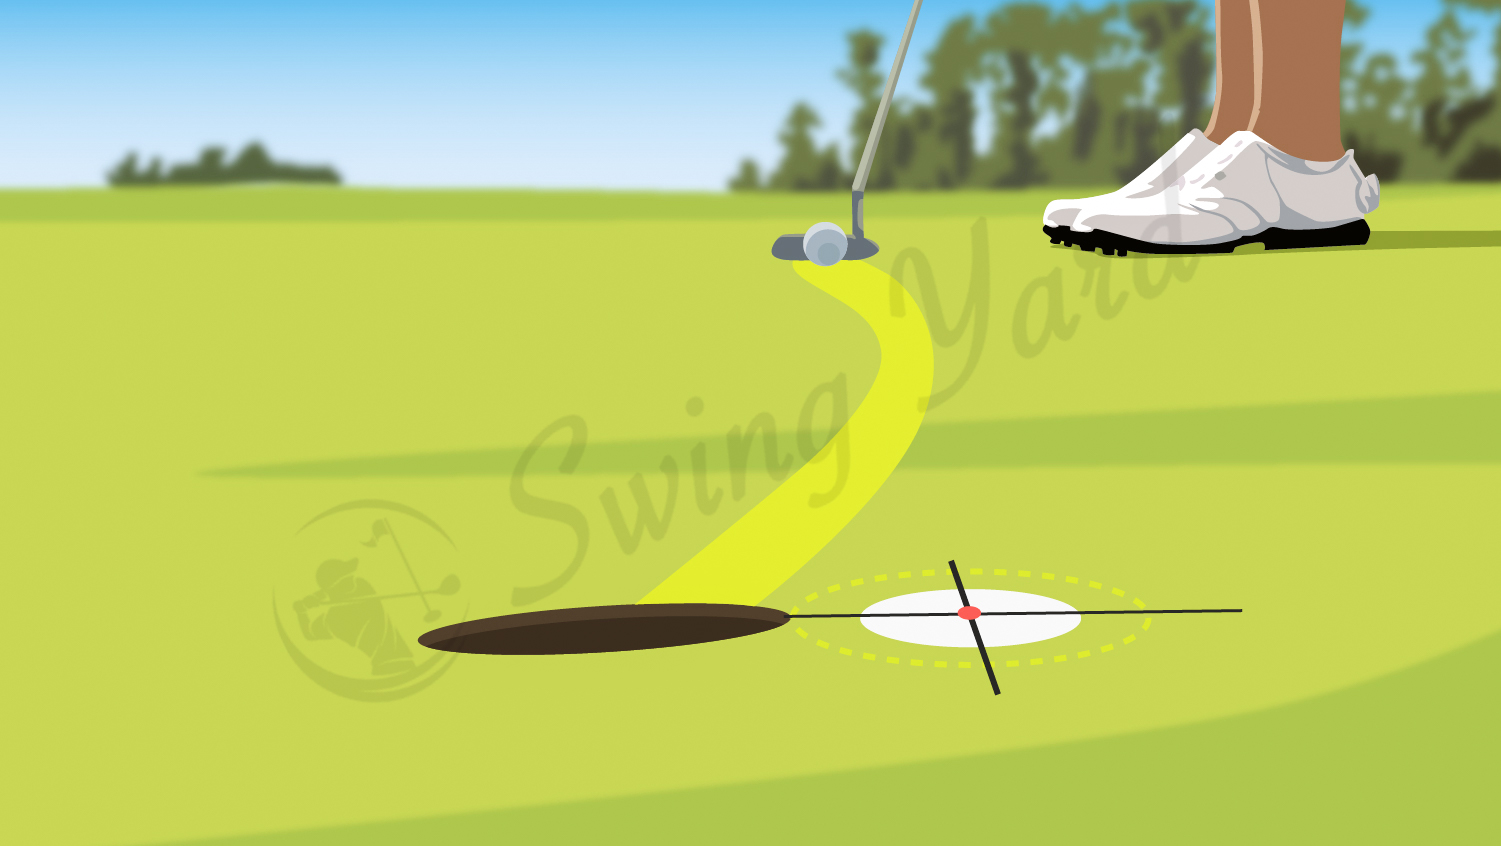 where you should aim the golf ball when putting